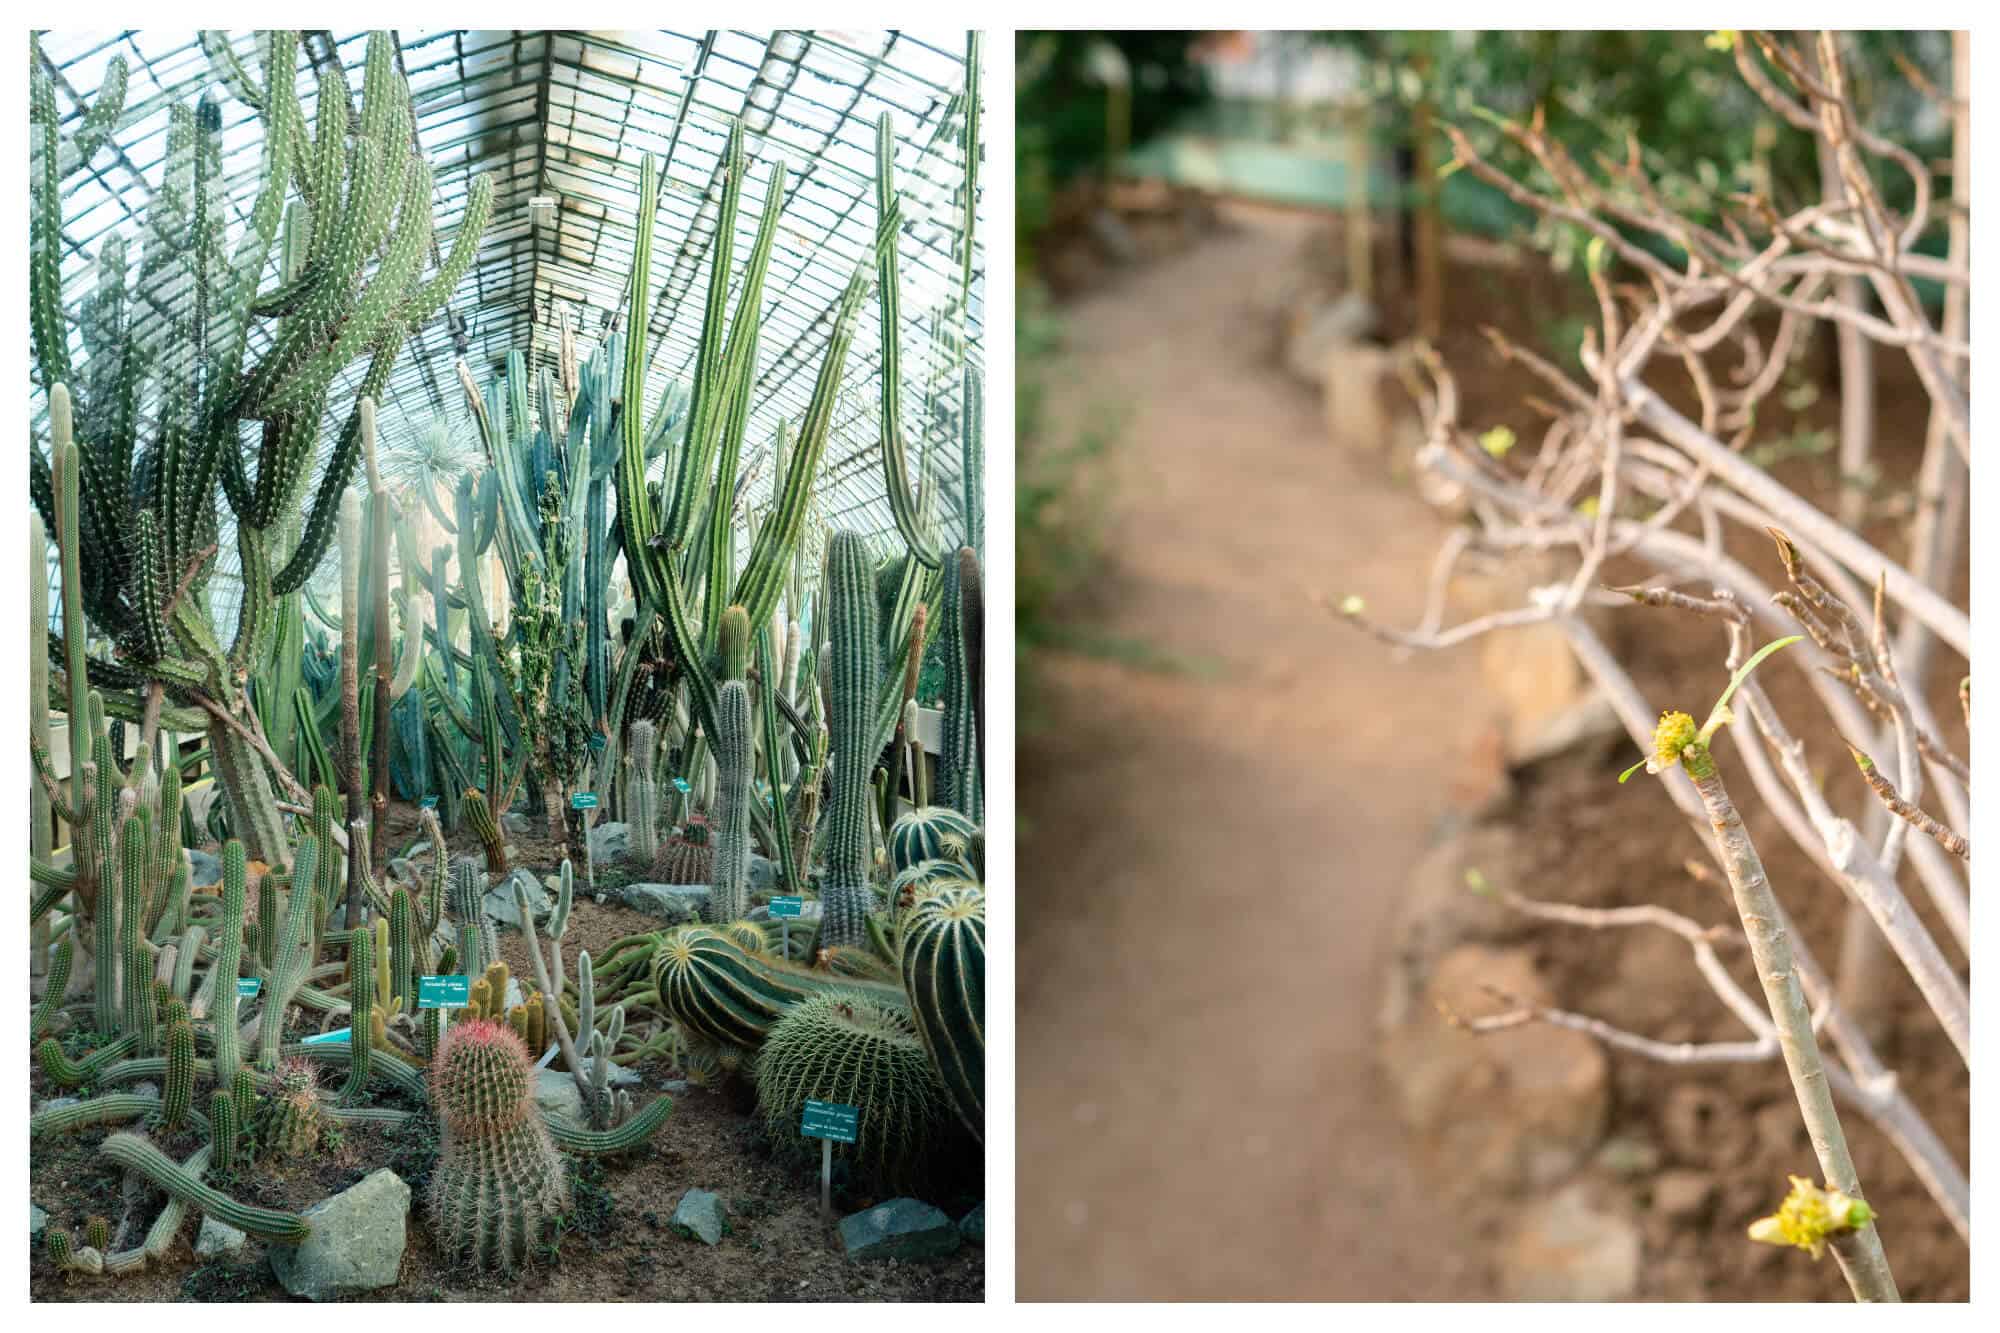 On left: The cactus room at the Serres d'Auteuil, in Paris' 16th arrondissement, is crammed with the desert plants both large and small, some with arms waving in a friendly dance, and others squat, low to the ground. On right: A little green bud begins to bloom at the Serres d'Auteuil in Paris' 16th arrondissement. 